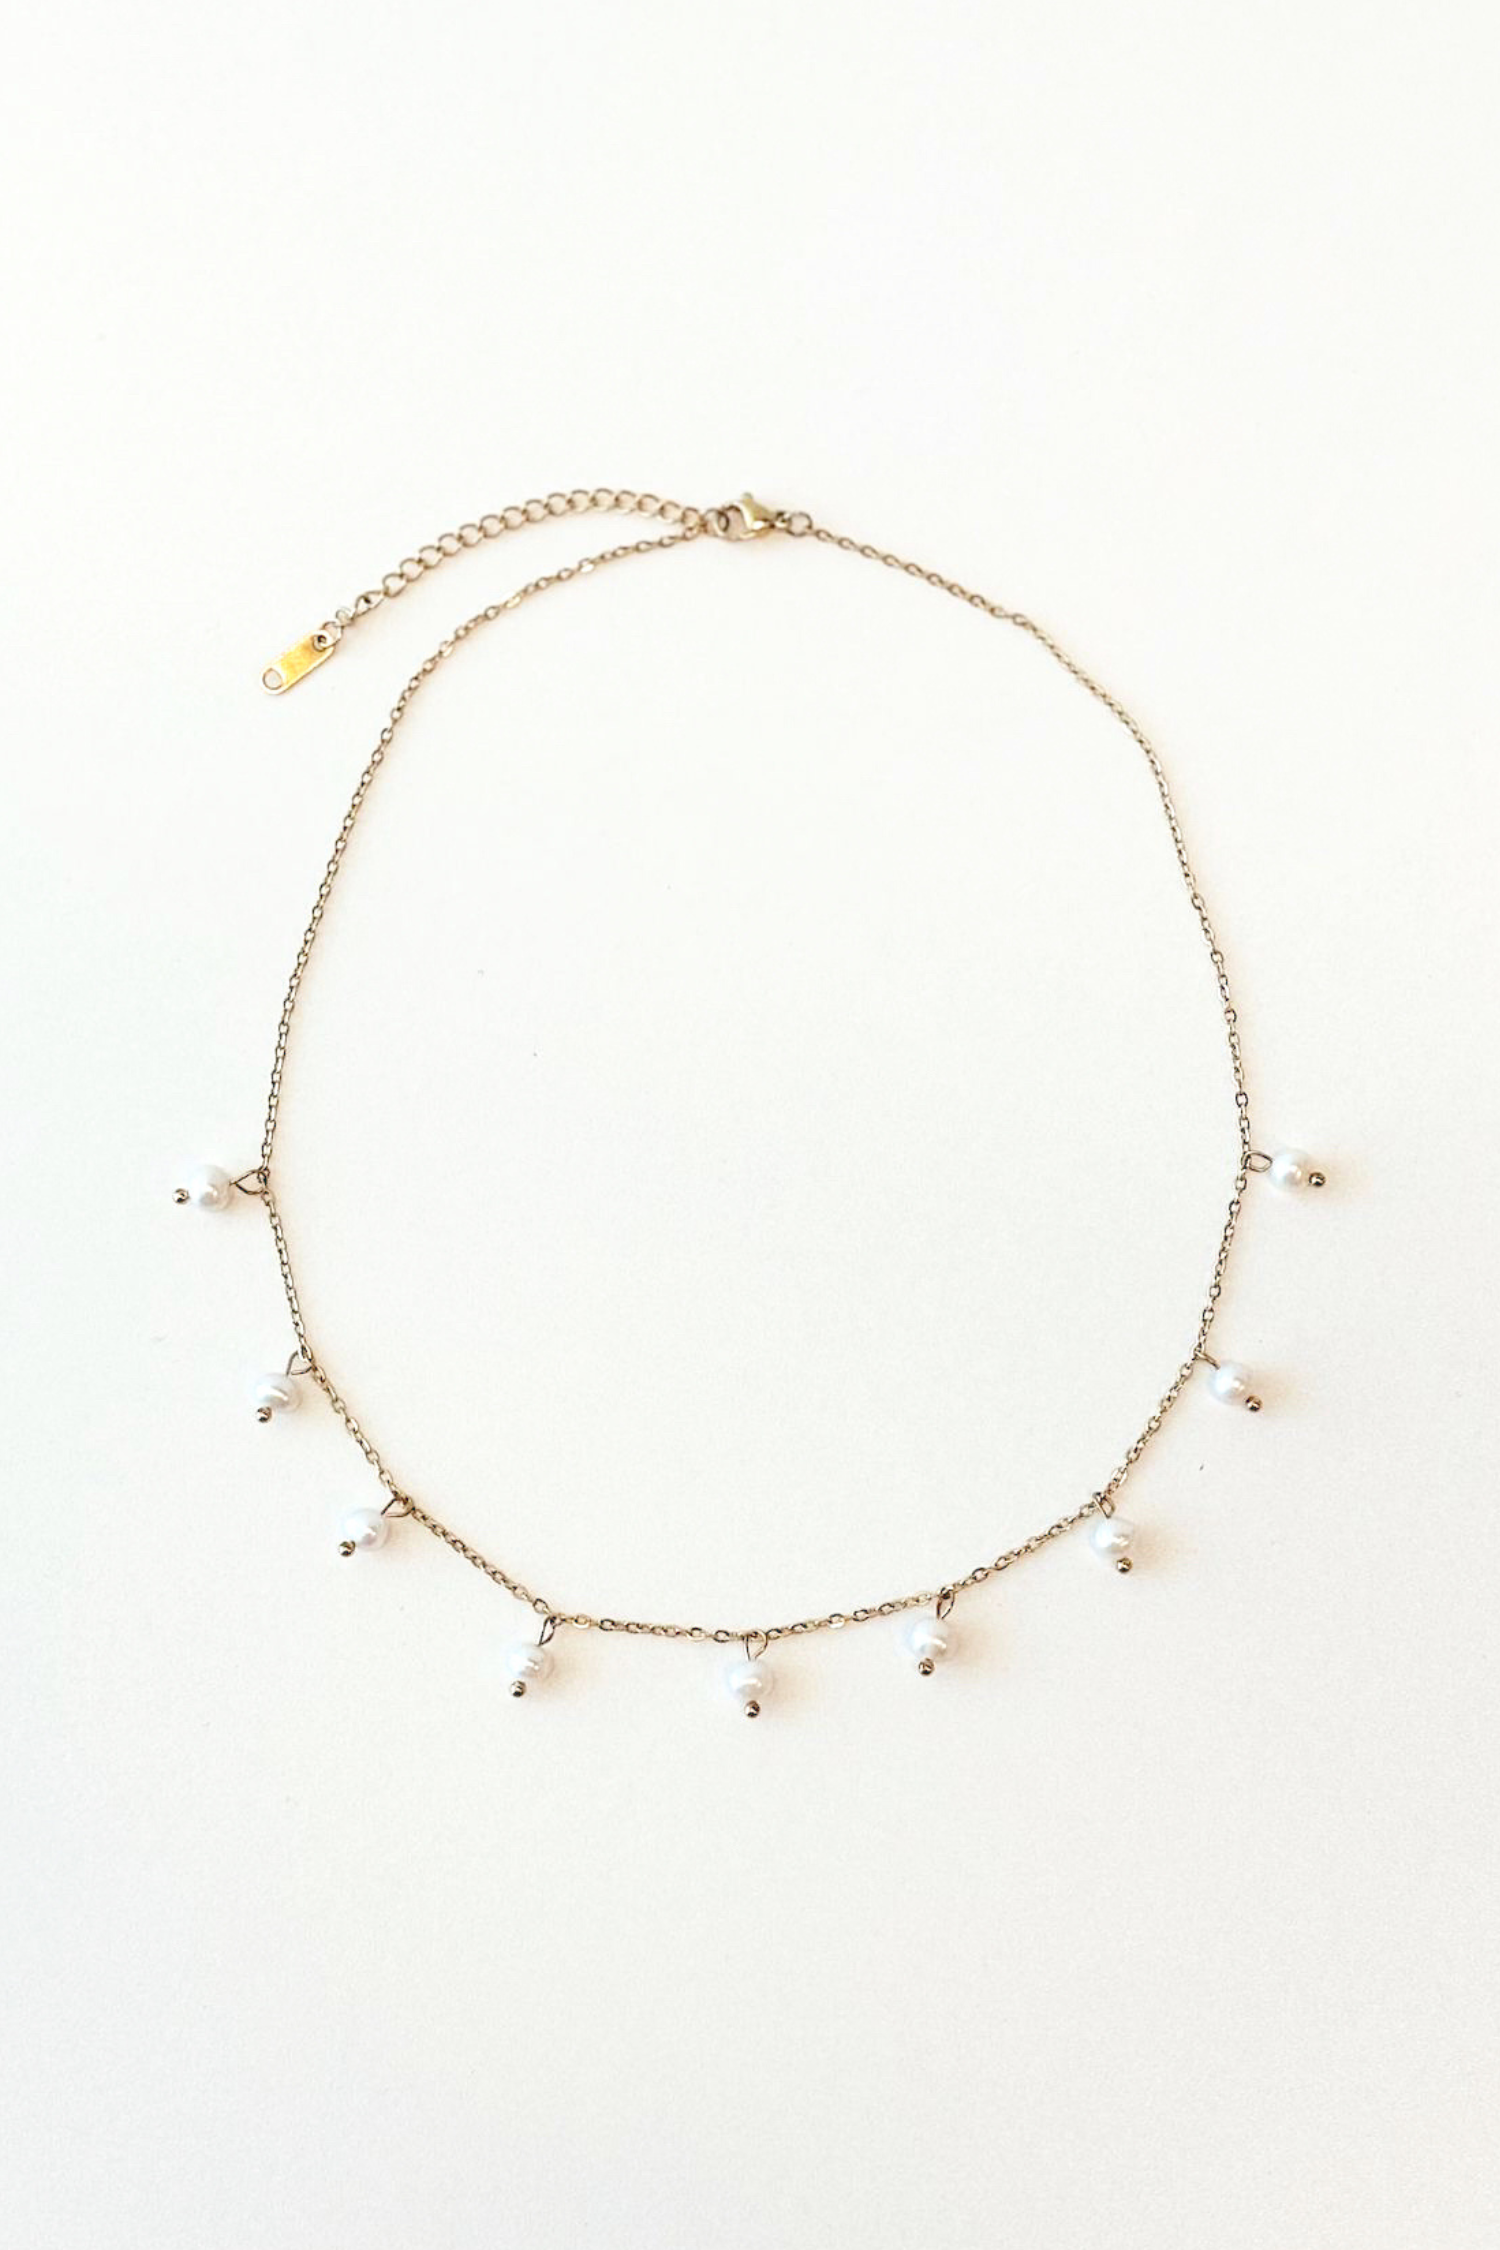 Phoebe Pearl Necklace - Gold